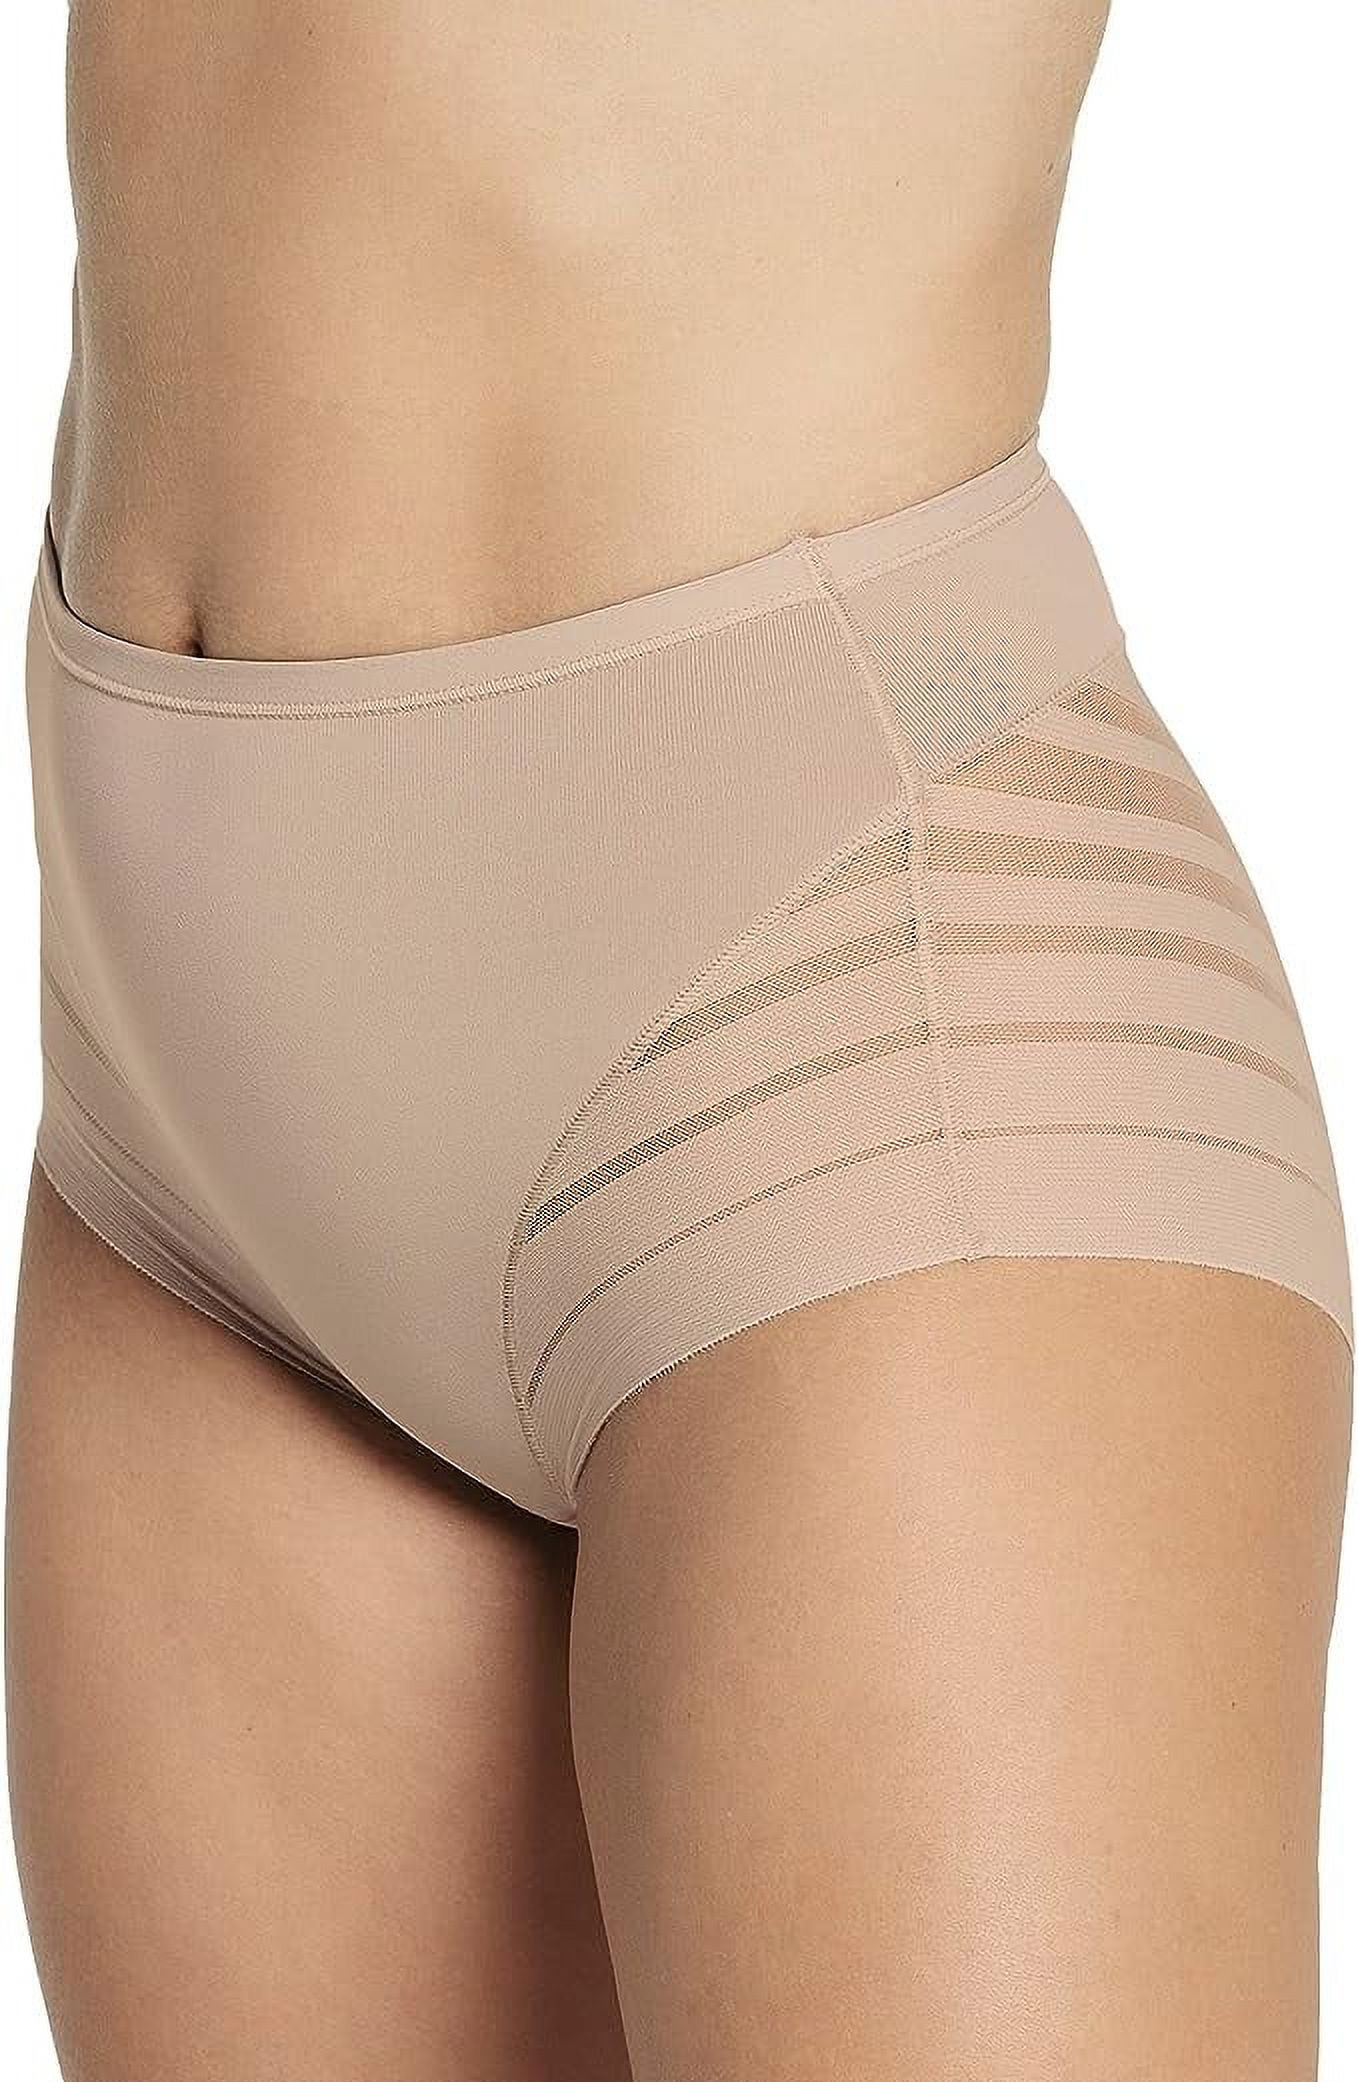 Leonisa, Invisible High Waisted Tummy Control Stripe Lace Underwear, Shapewear Panties for Women